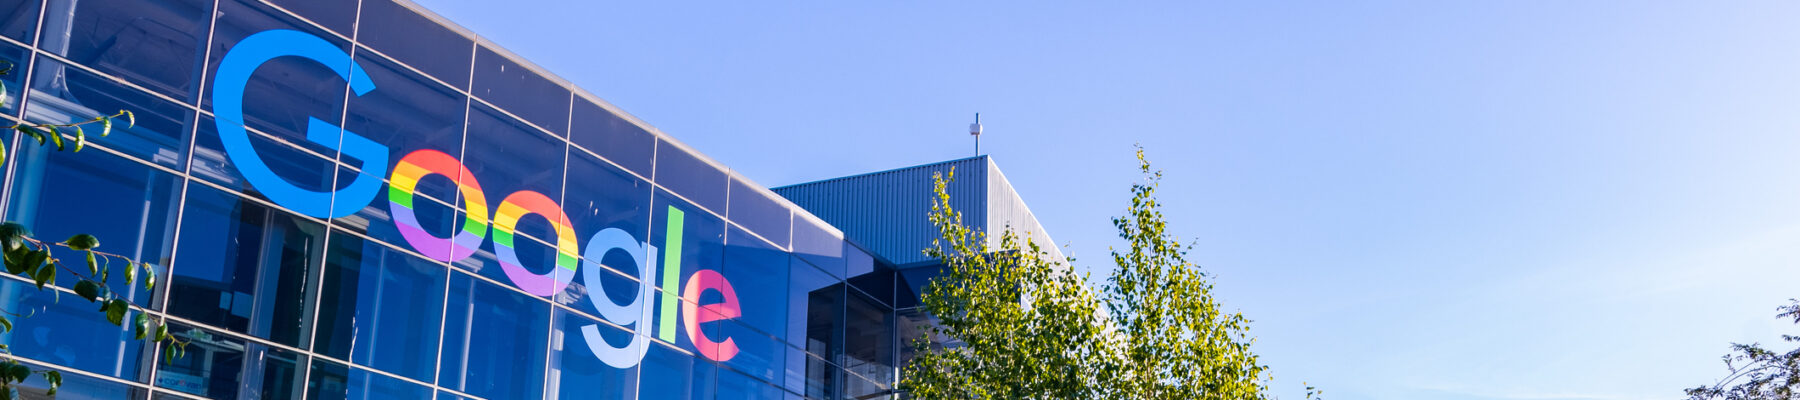 June 8, 2019 Mountain View / CA / USA - Google office building in the Company's campus in Silicon Valley; The "double o's" of the logo are decorated in rainbow colors in honor of LGBTQ Rights